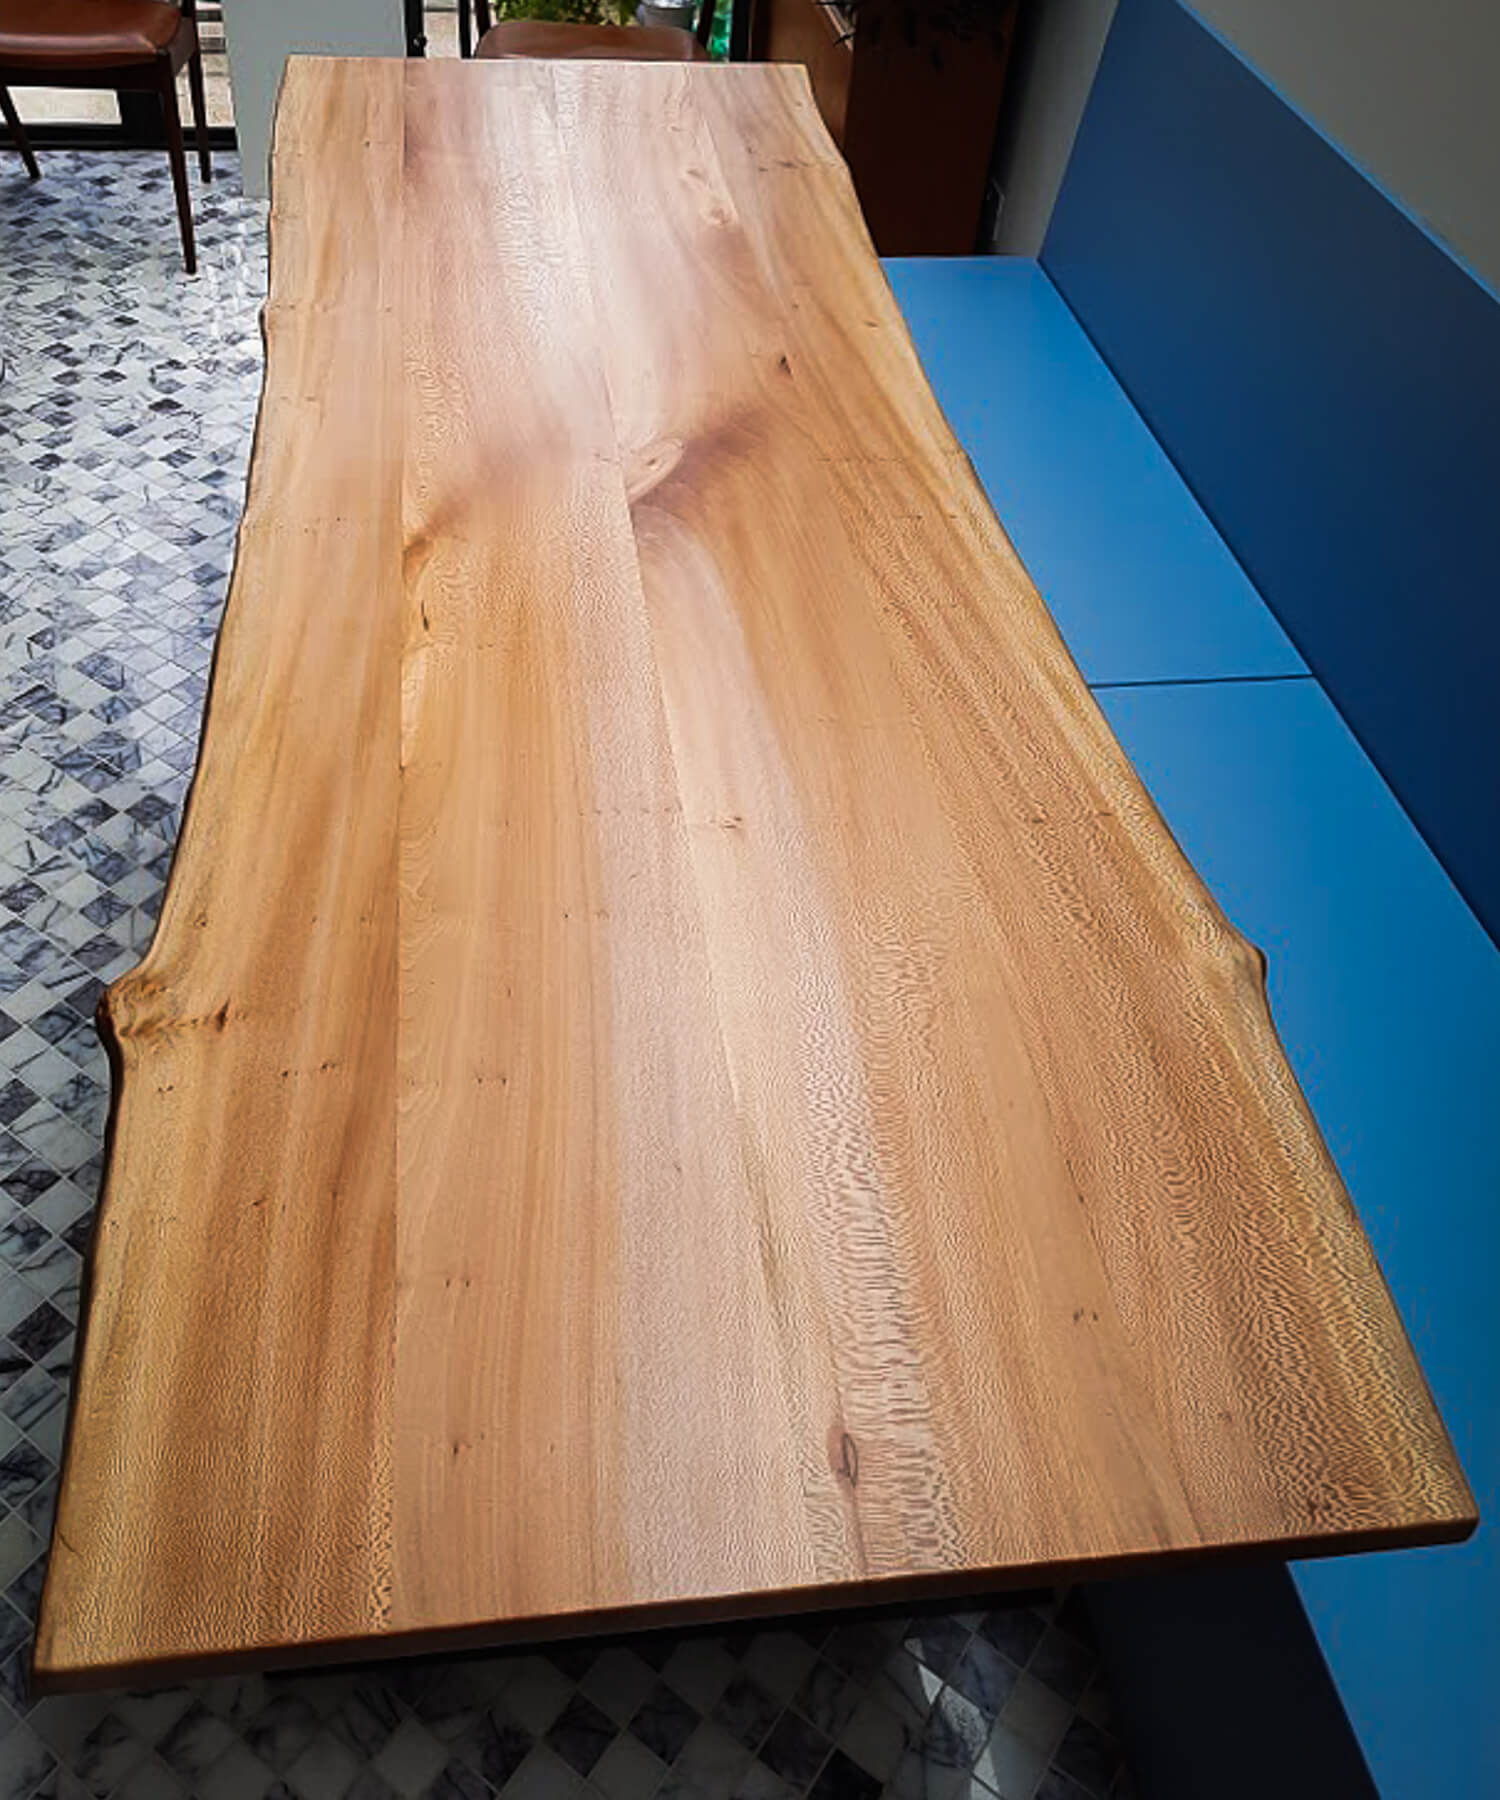 London Plane table made by Fallen and Felled